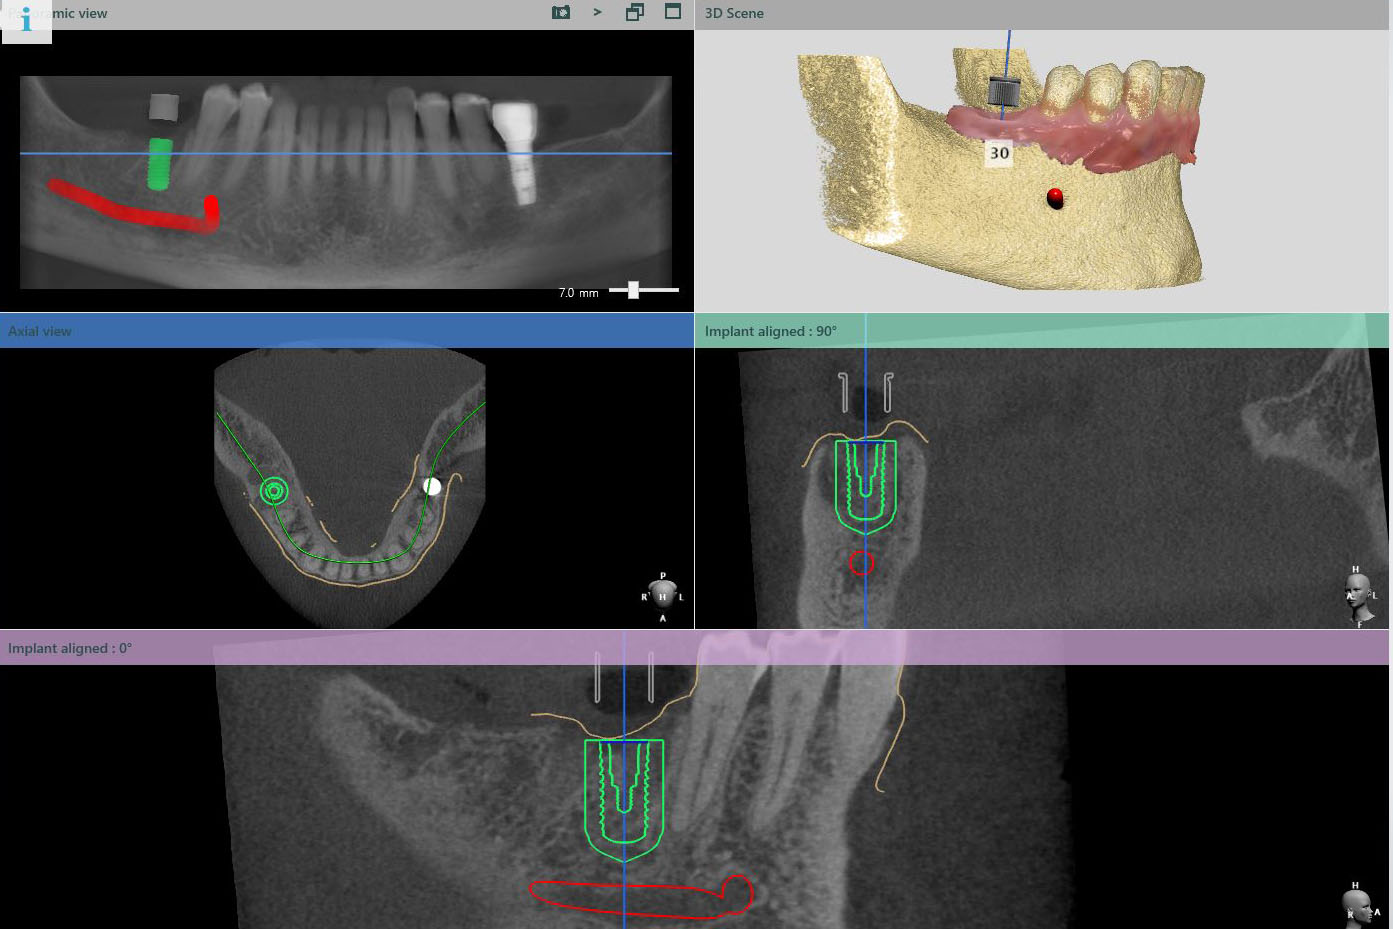 Image detailing digital implant treatment planing software showing the impant position from all views including 3D rendering. 